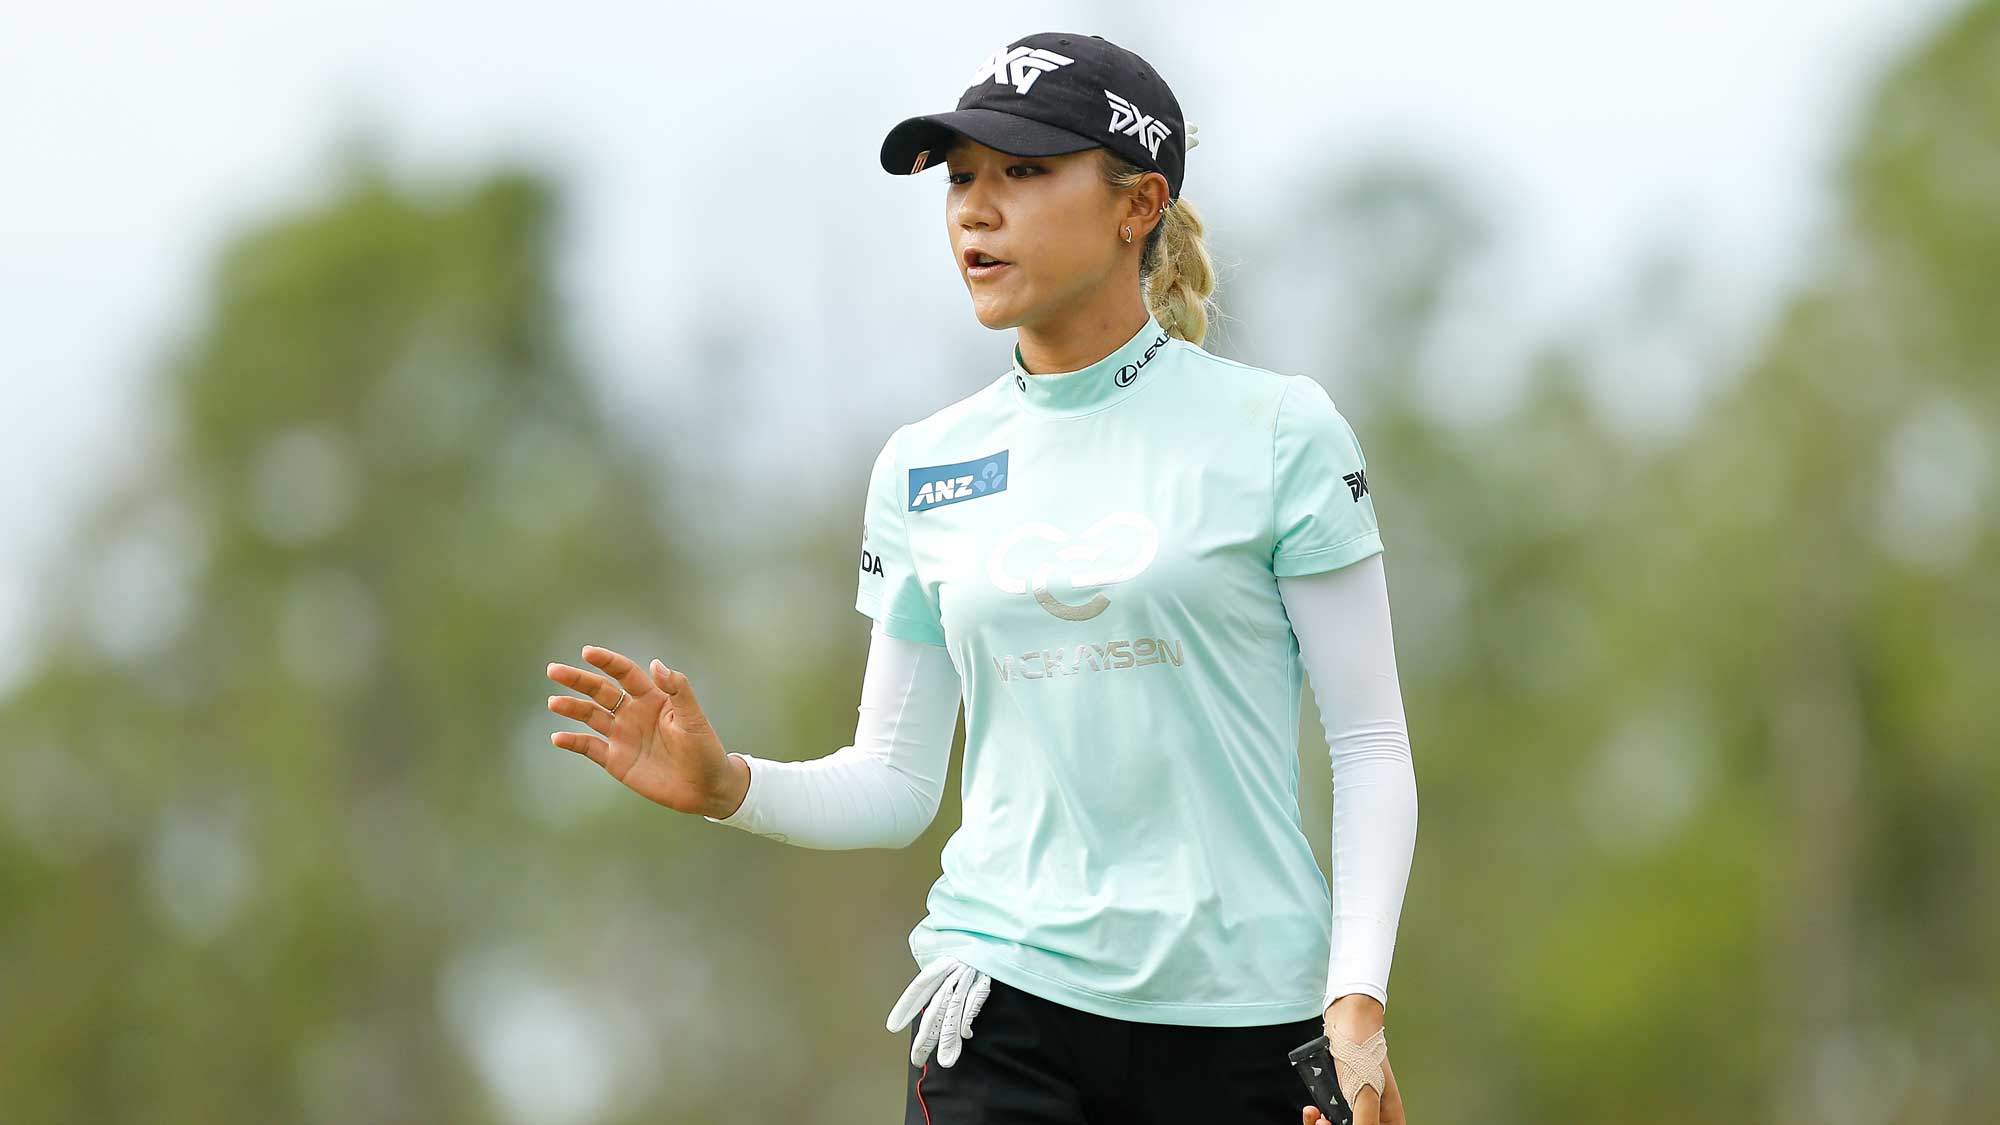 Lydia Ko of New Zealand reacts after a putt on the first green during the final round of the LPGA CME Group Tour Championship